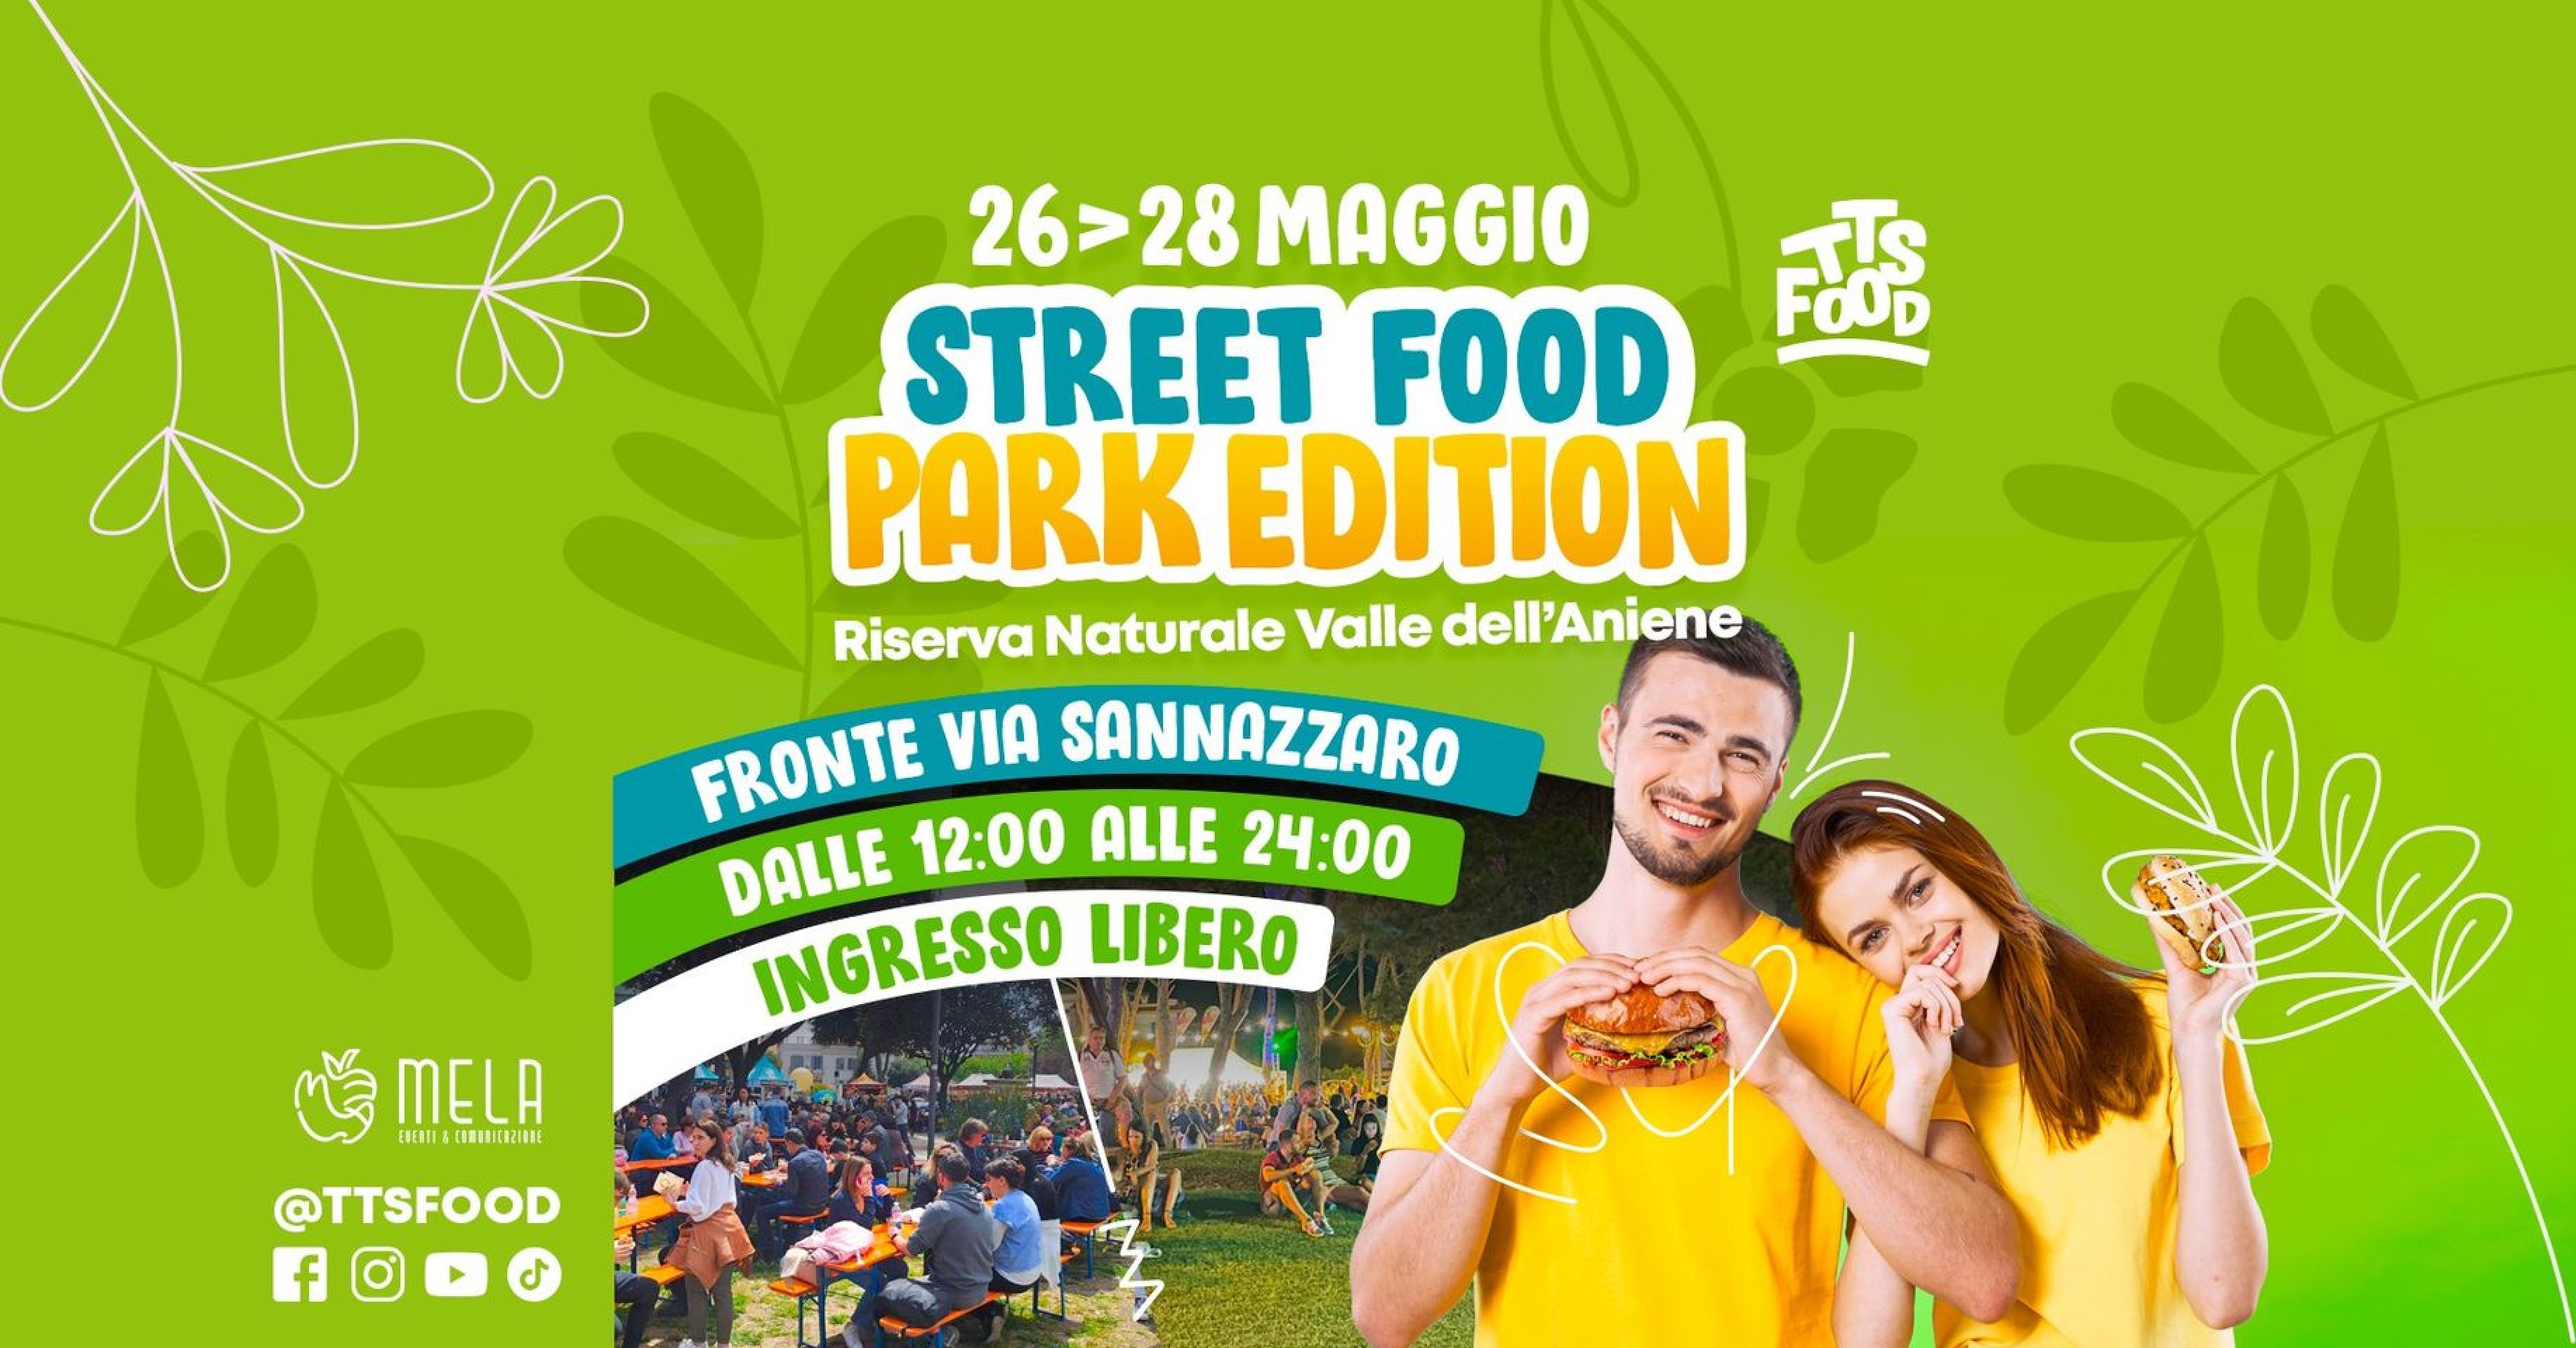 PARK EDITION STREET FOOD ROMA by TTS FOOD